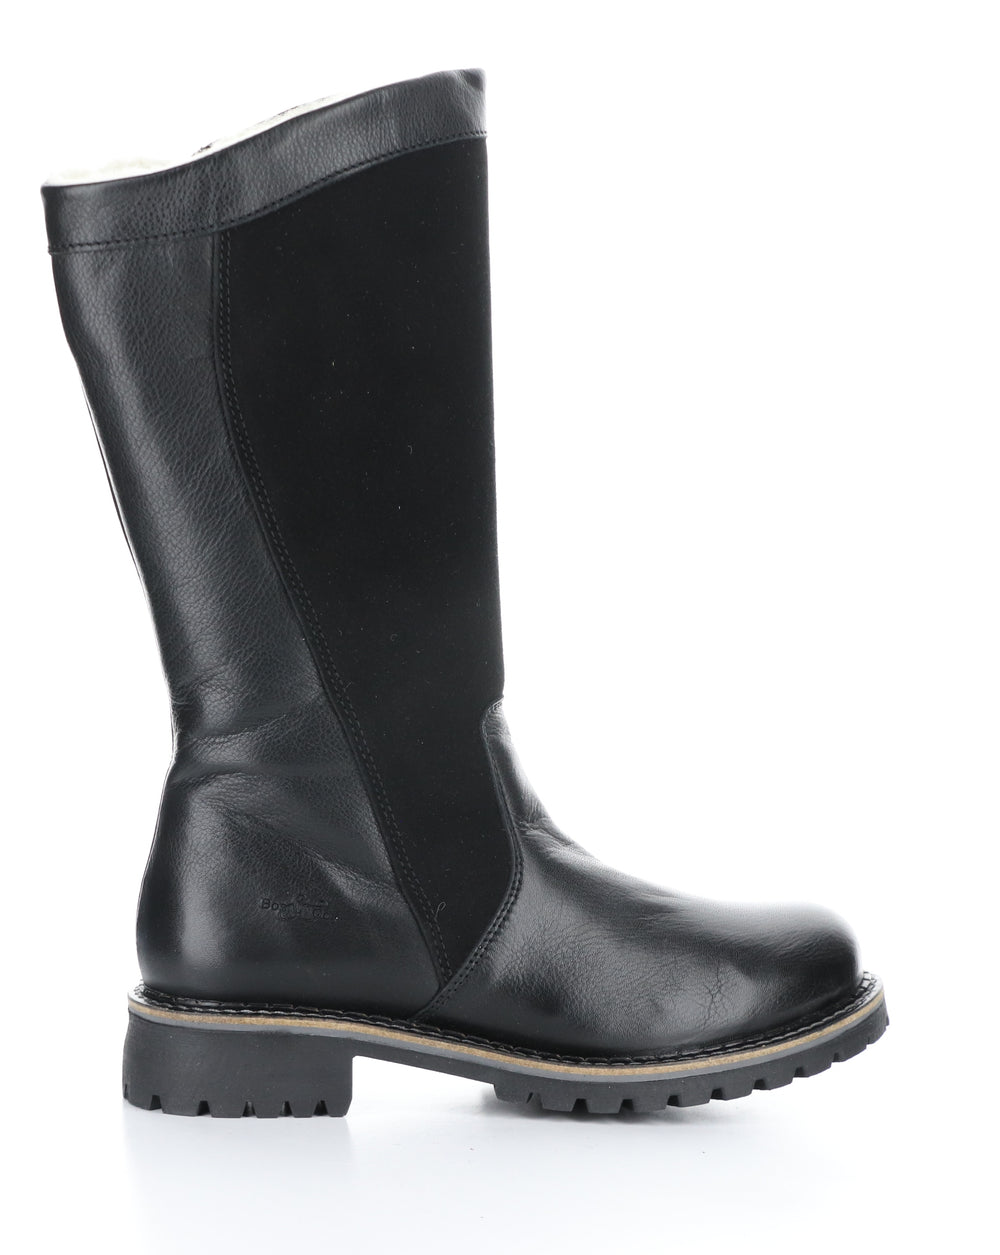 HENRY BLACK Round Toe Boots